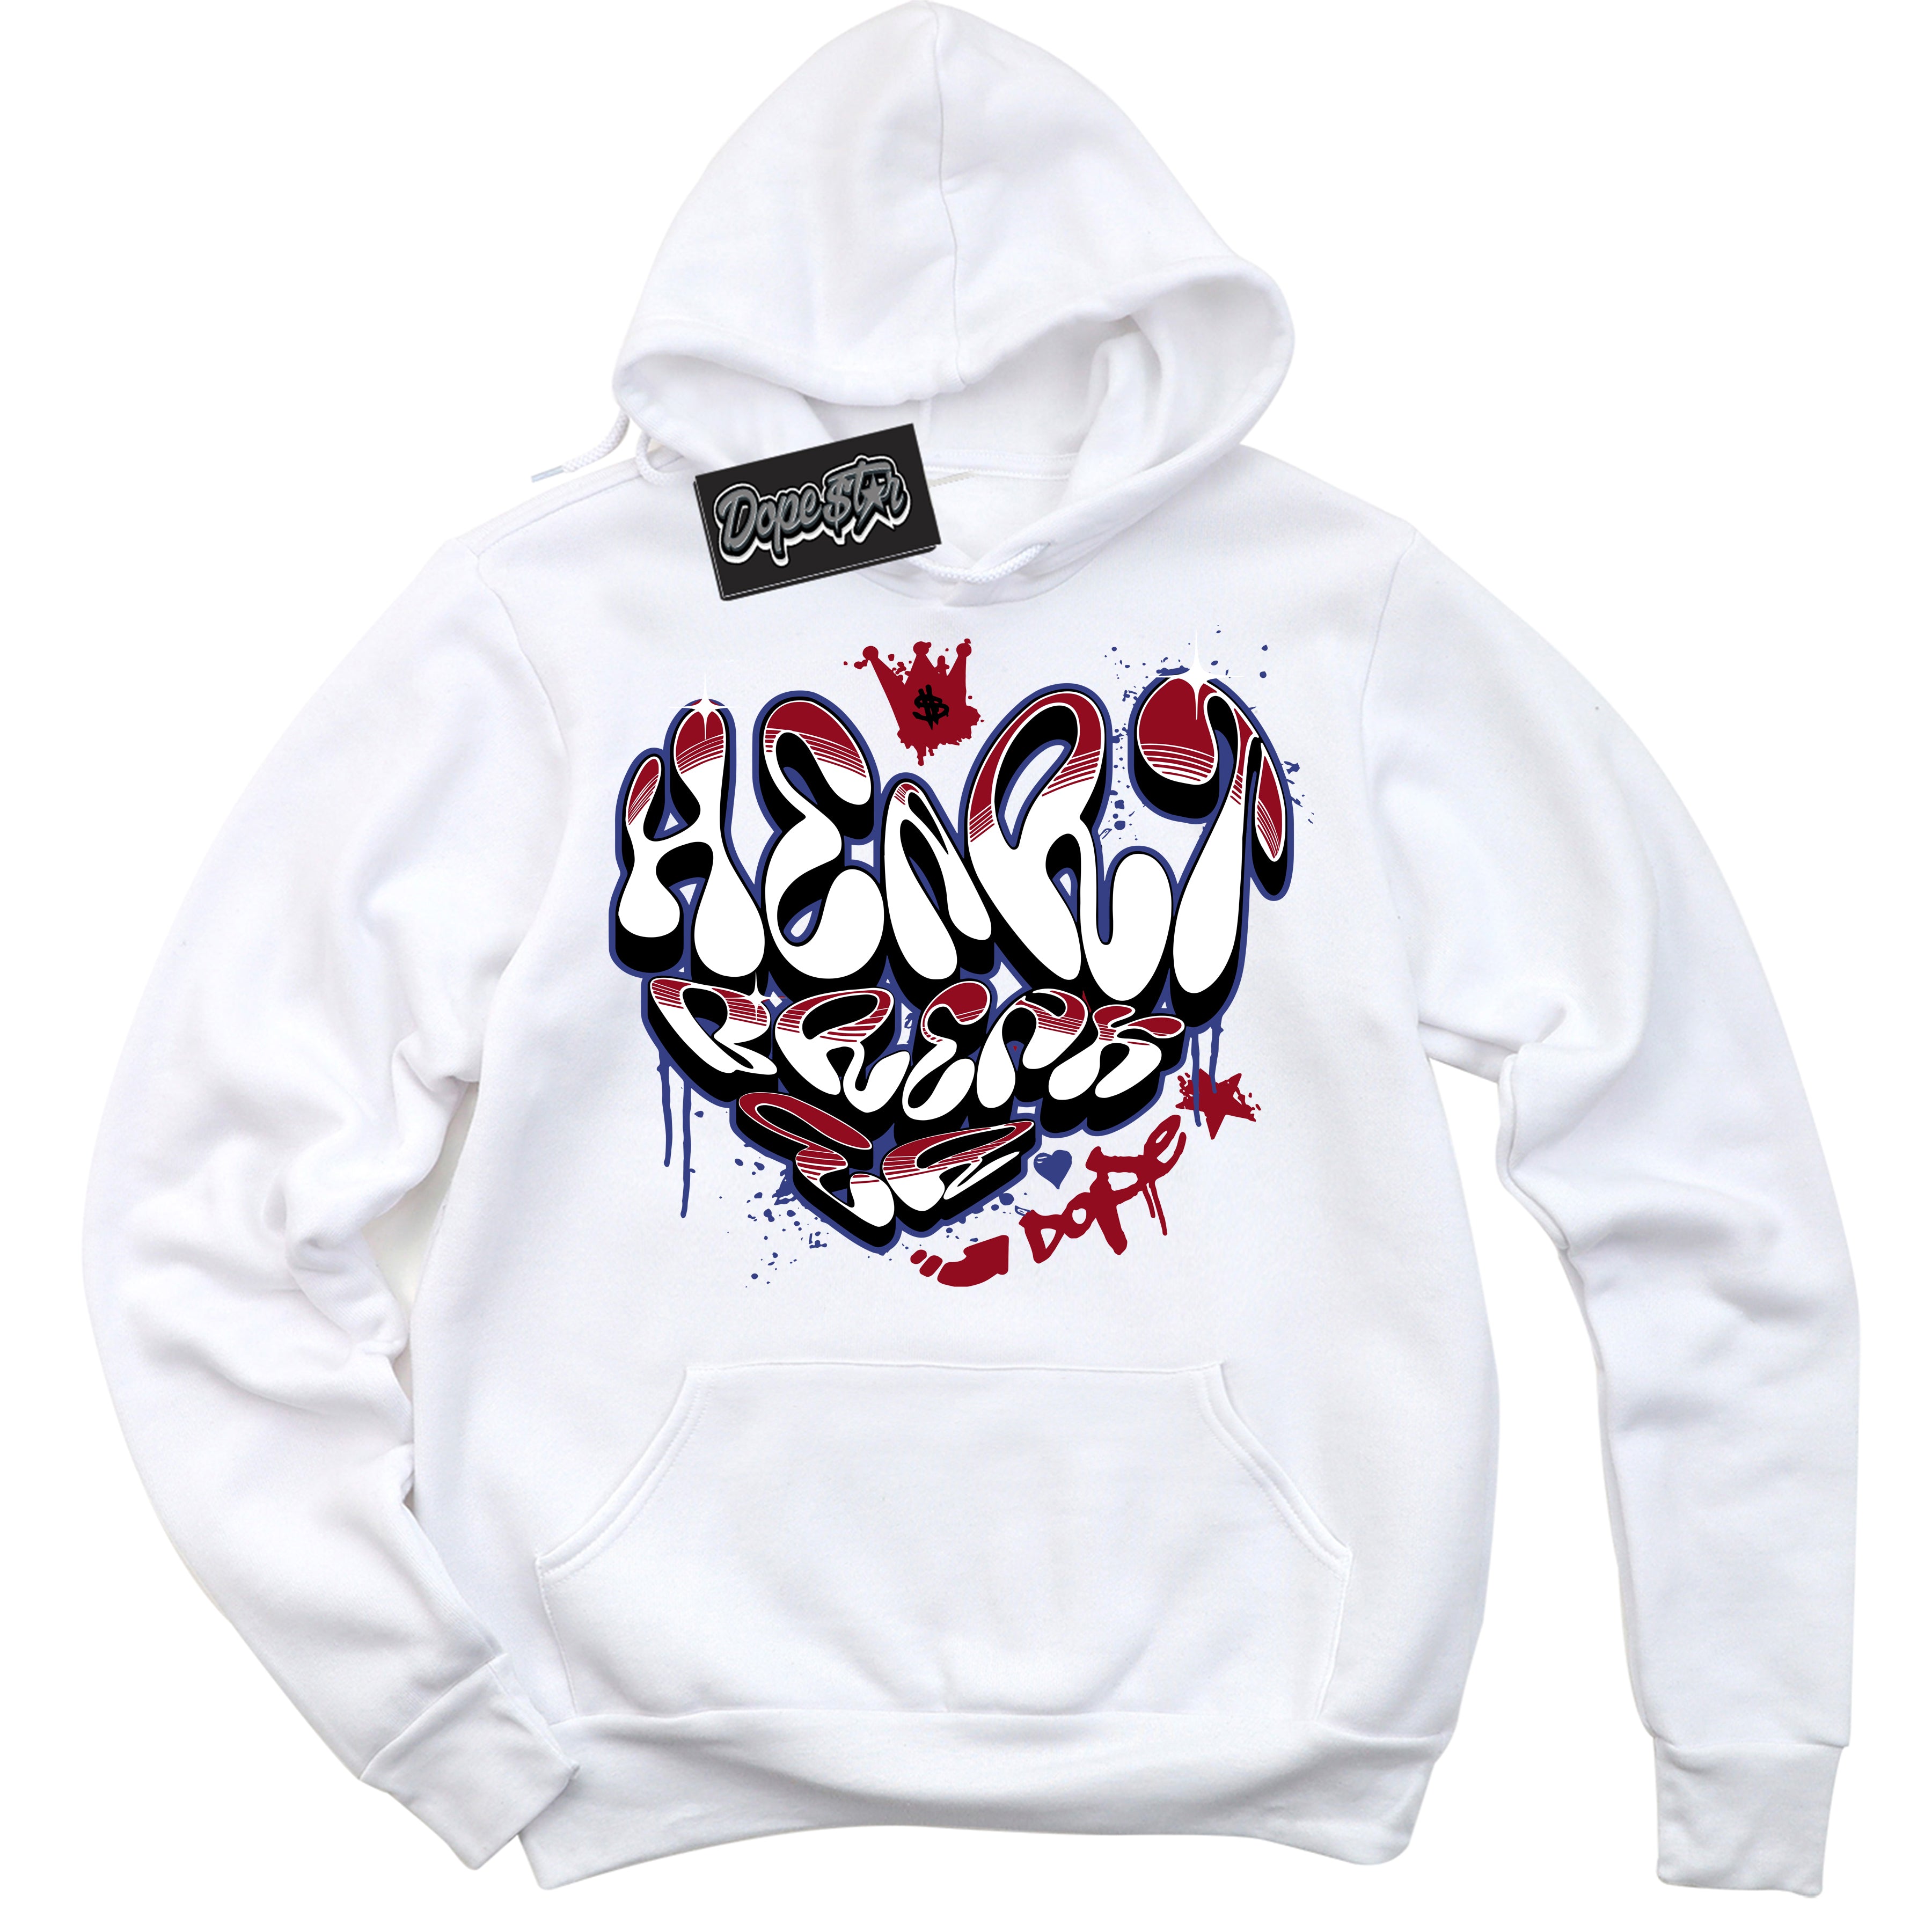 Cool White Hoodie with “ HeartBreaker Graffiti ”  design that Perfectly Matches Playoffs 8s Sneakers.